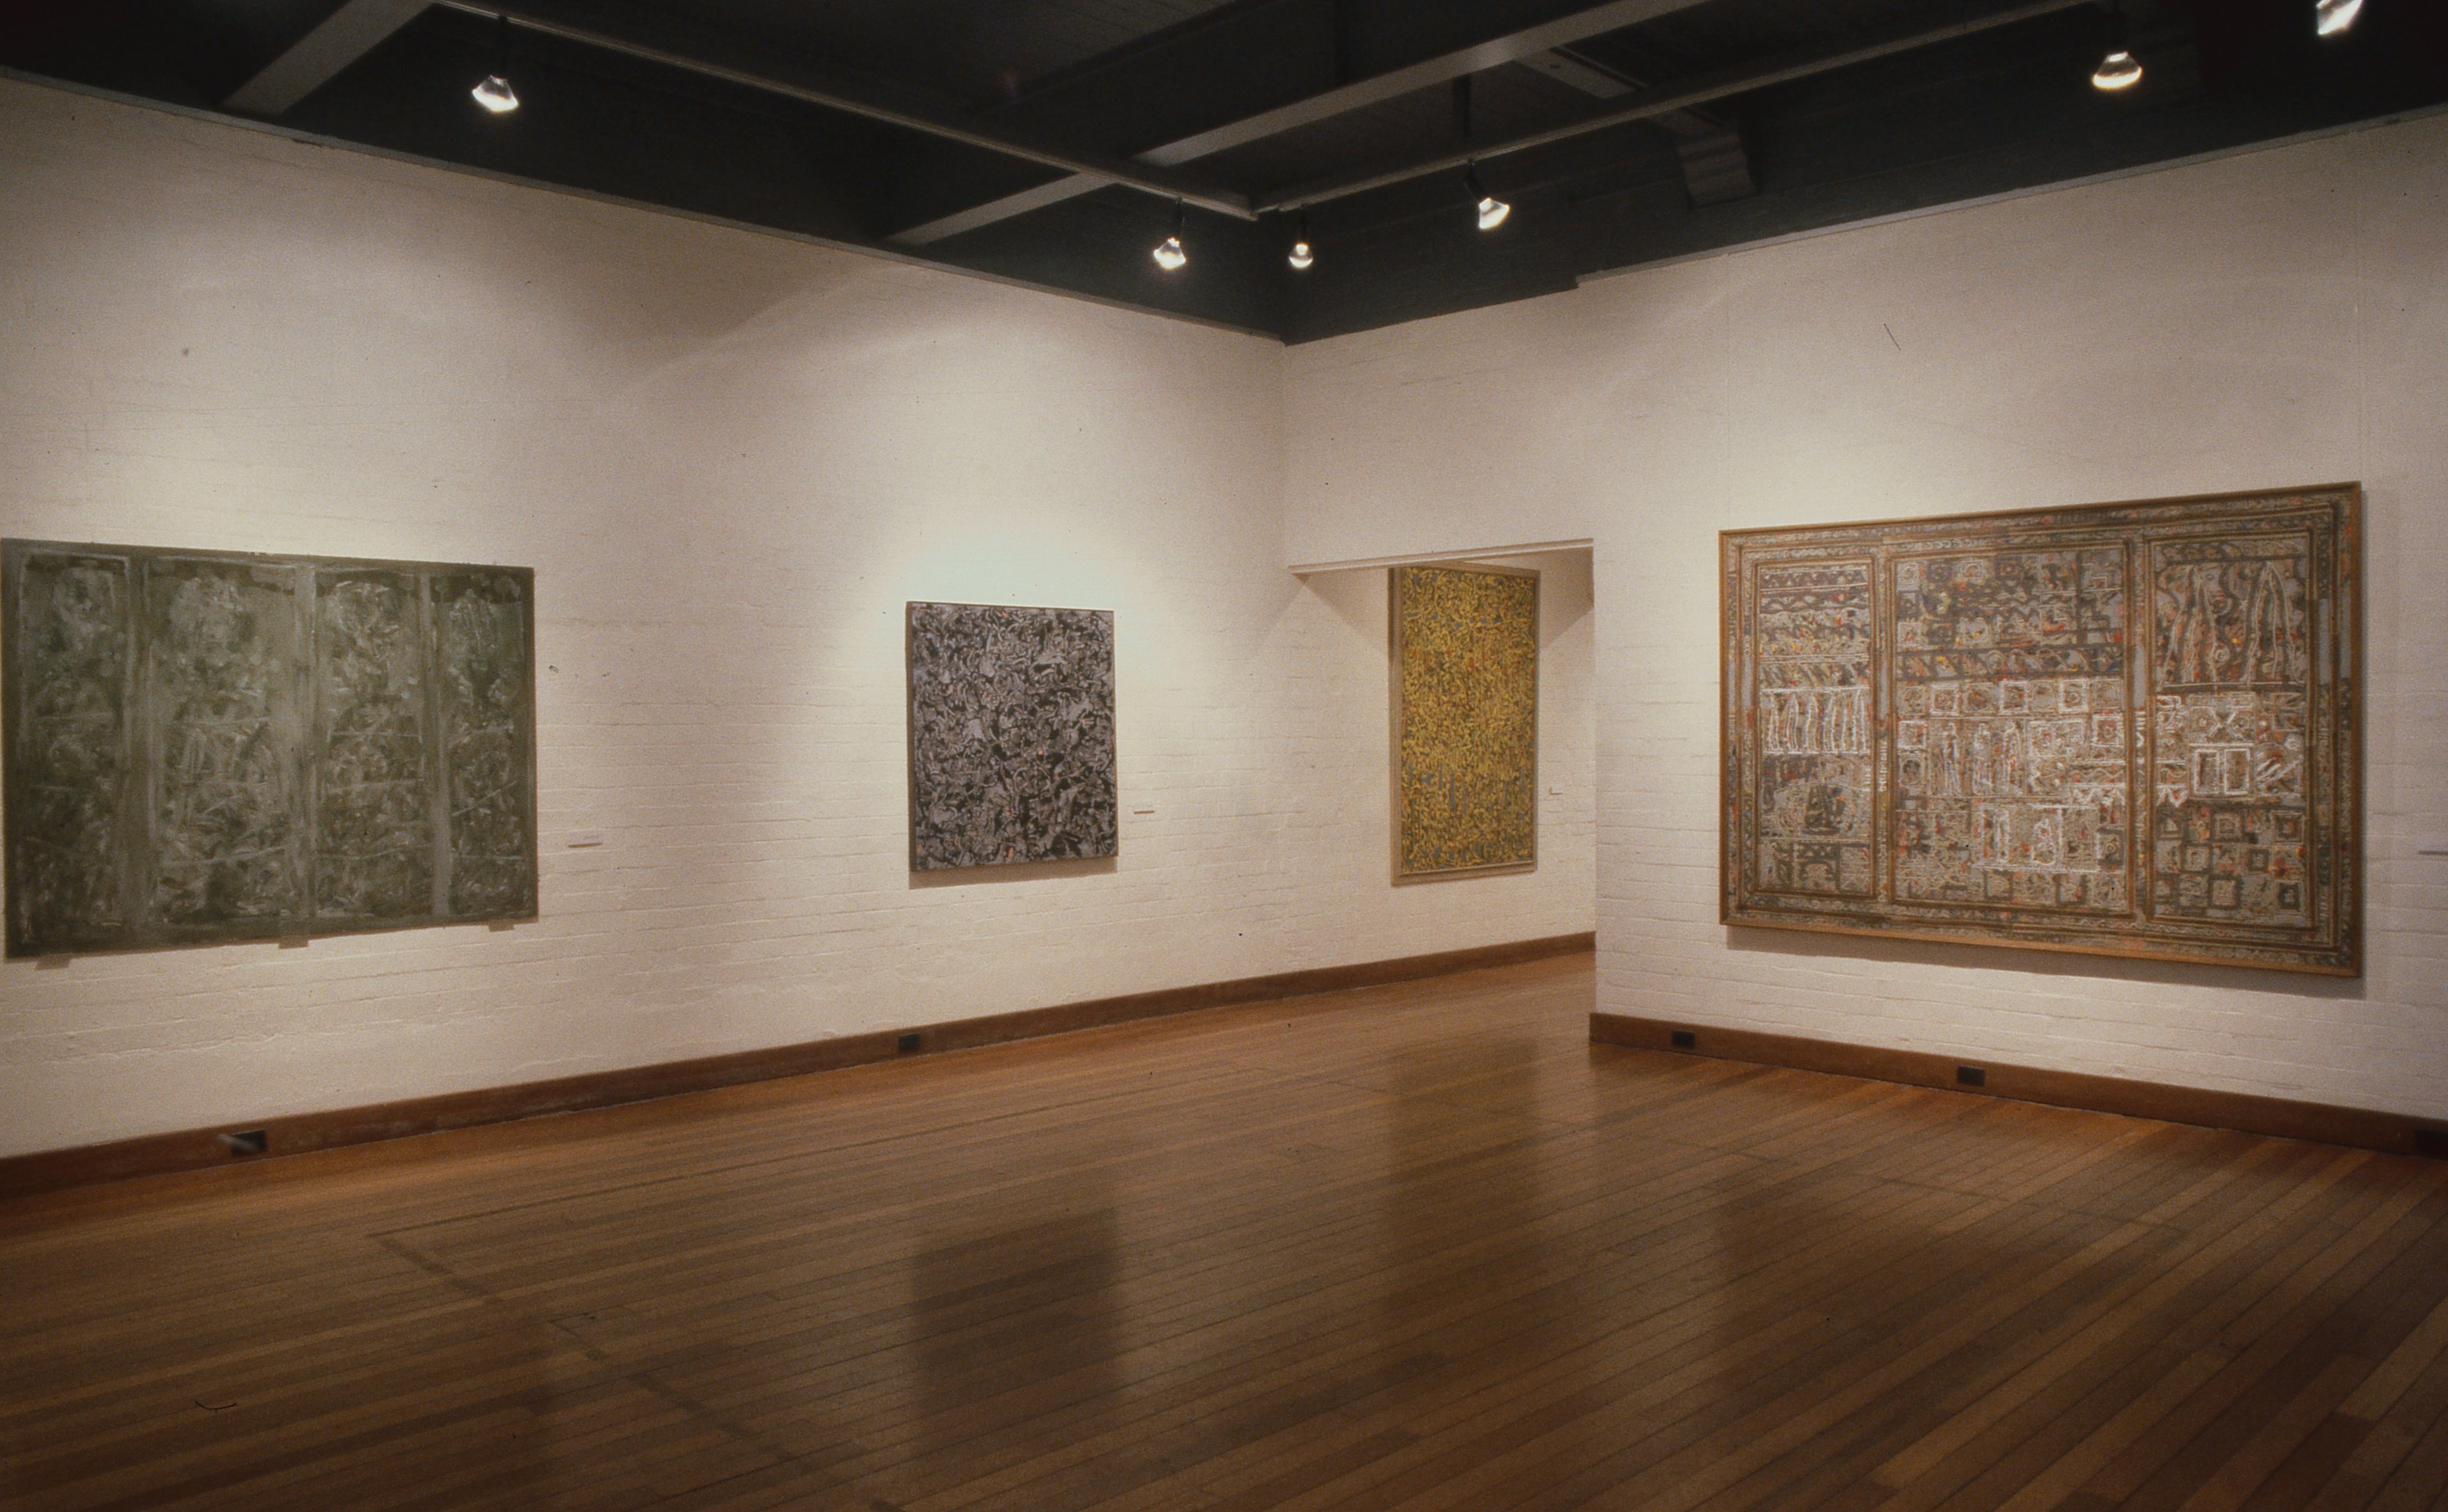 idg_archive_1994_points_of_view_rod_milgate_paintings_002_install.jpg